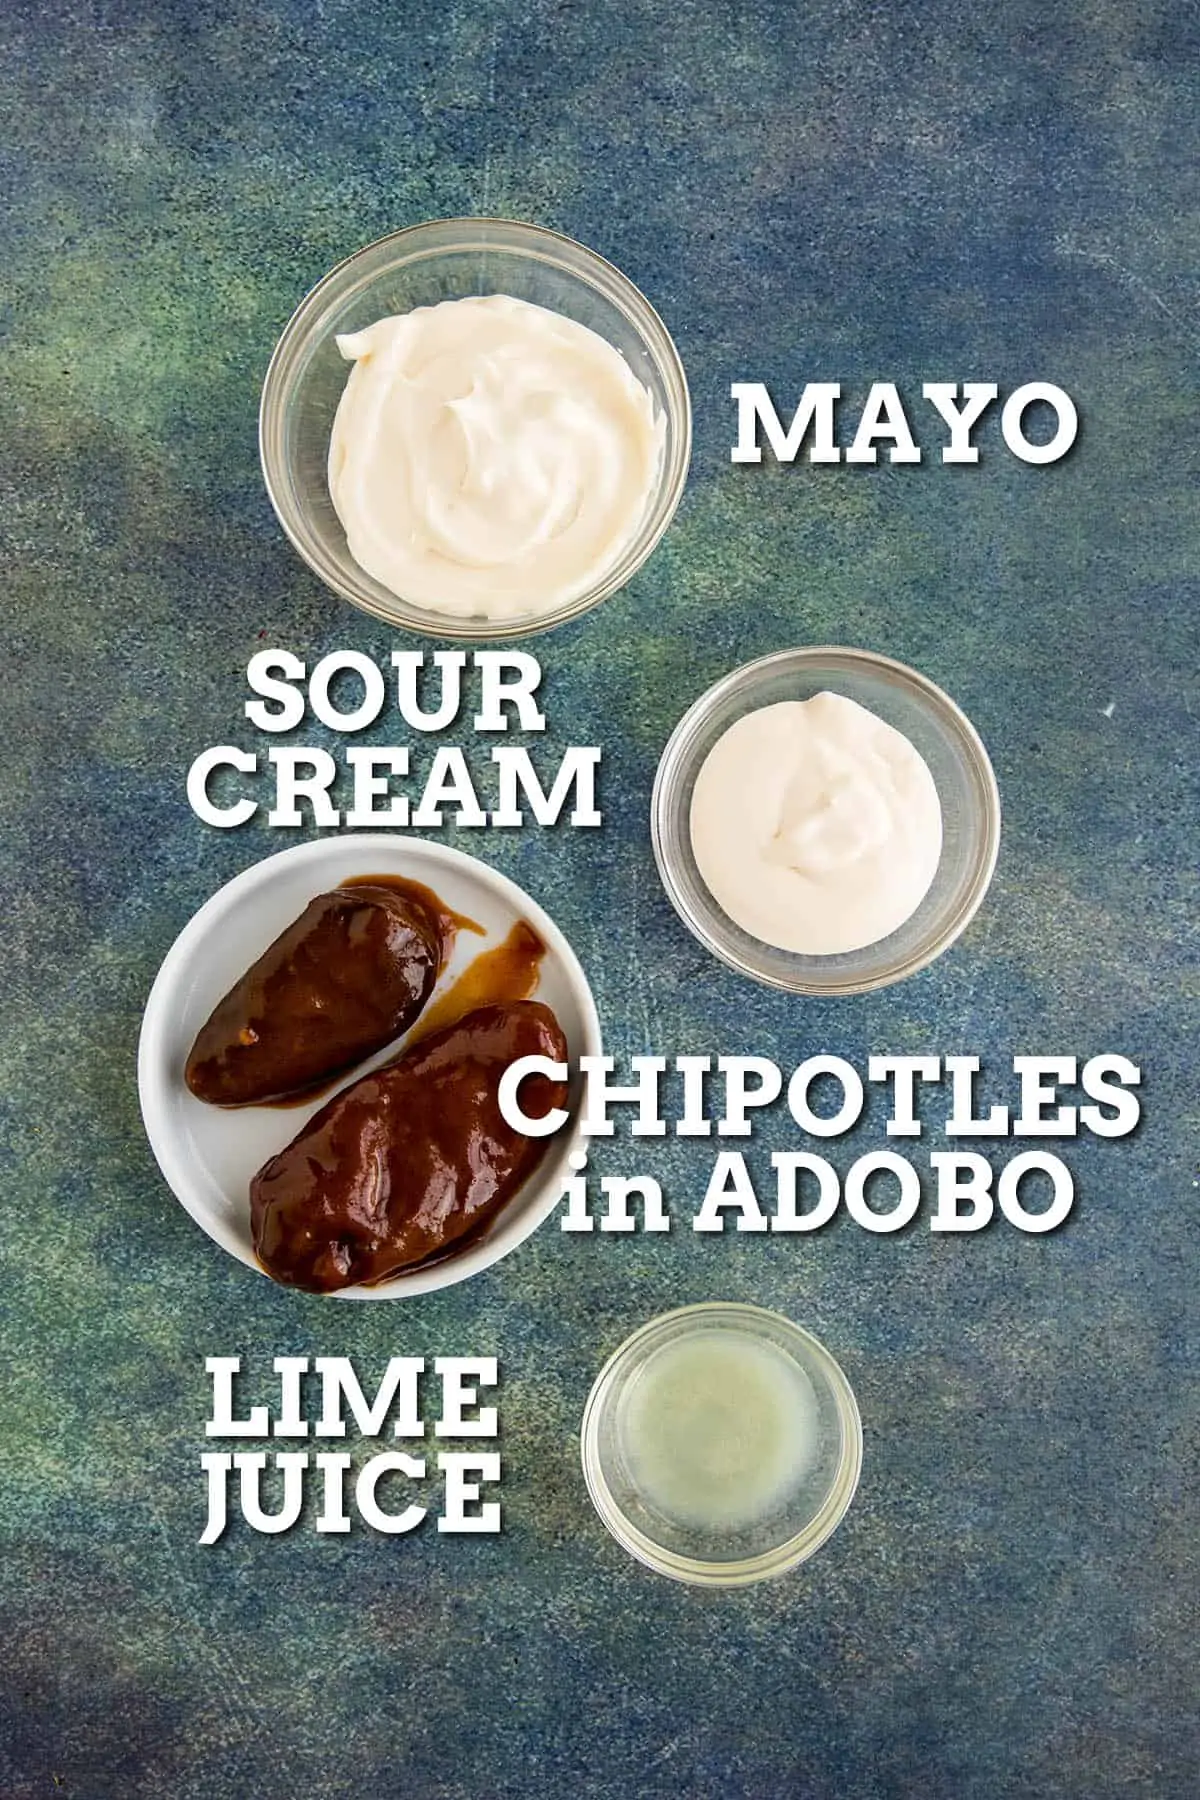 Chipotle Mayo ingredients.